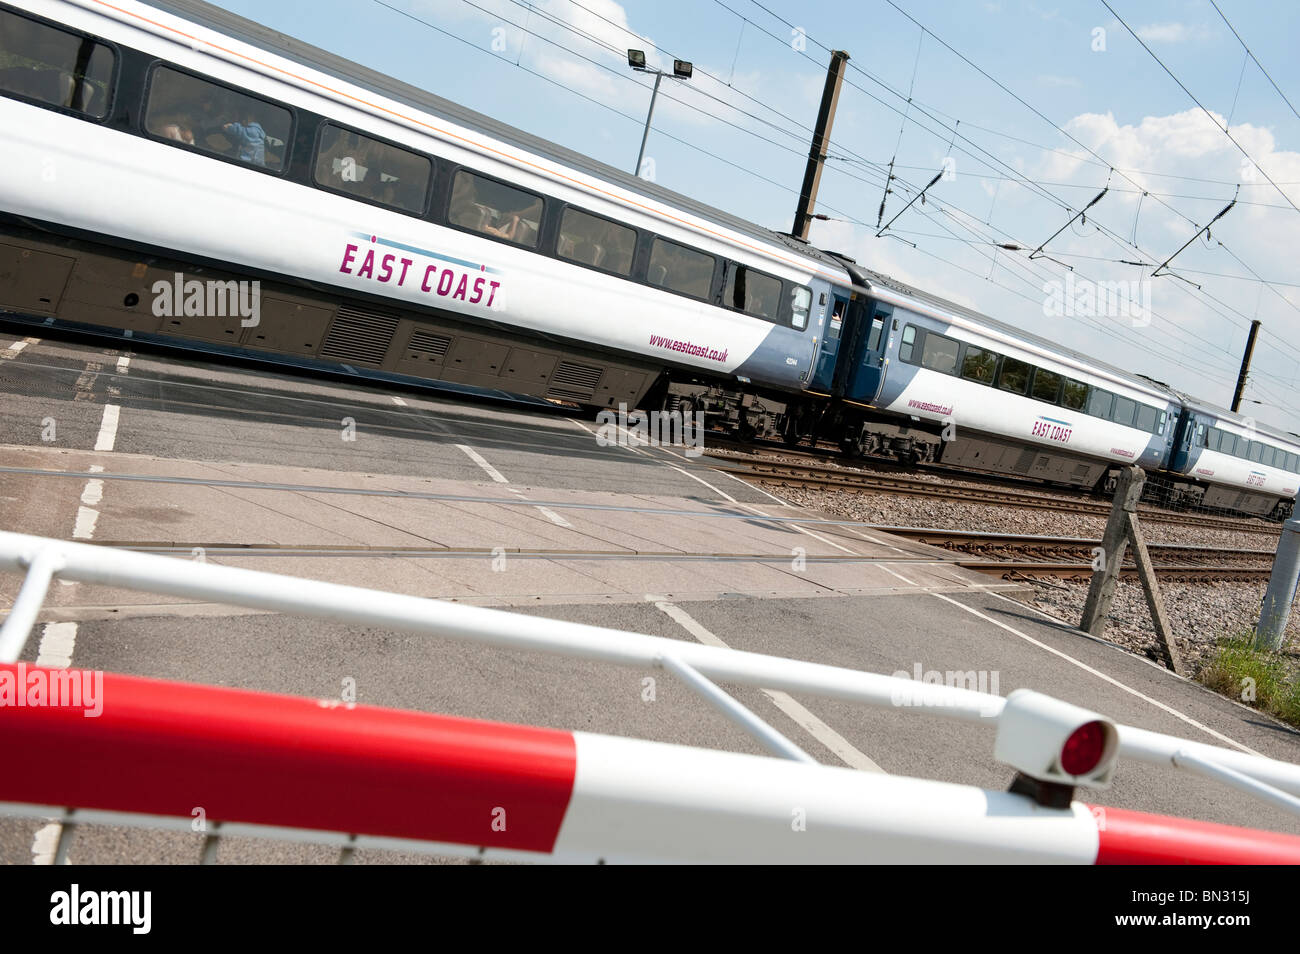 East Coast high speed passenger train travelling at speed through a level crossing on the east coast main line in England. Stock Photo